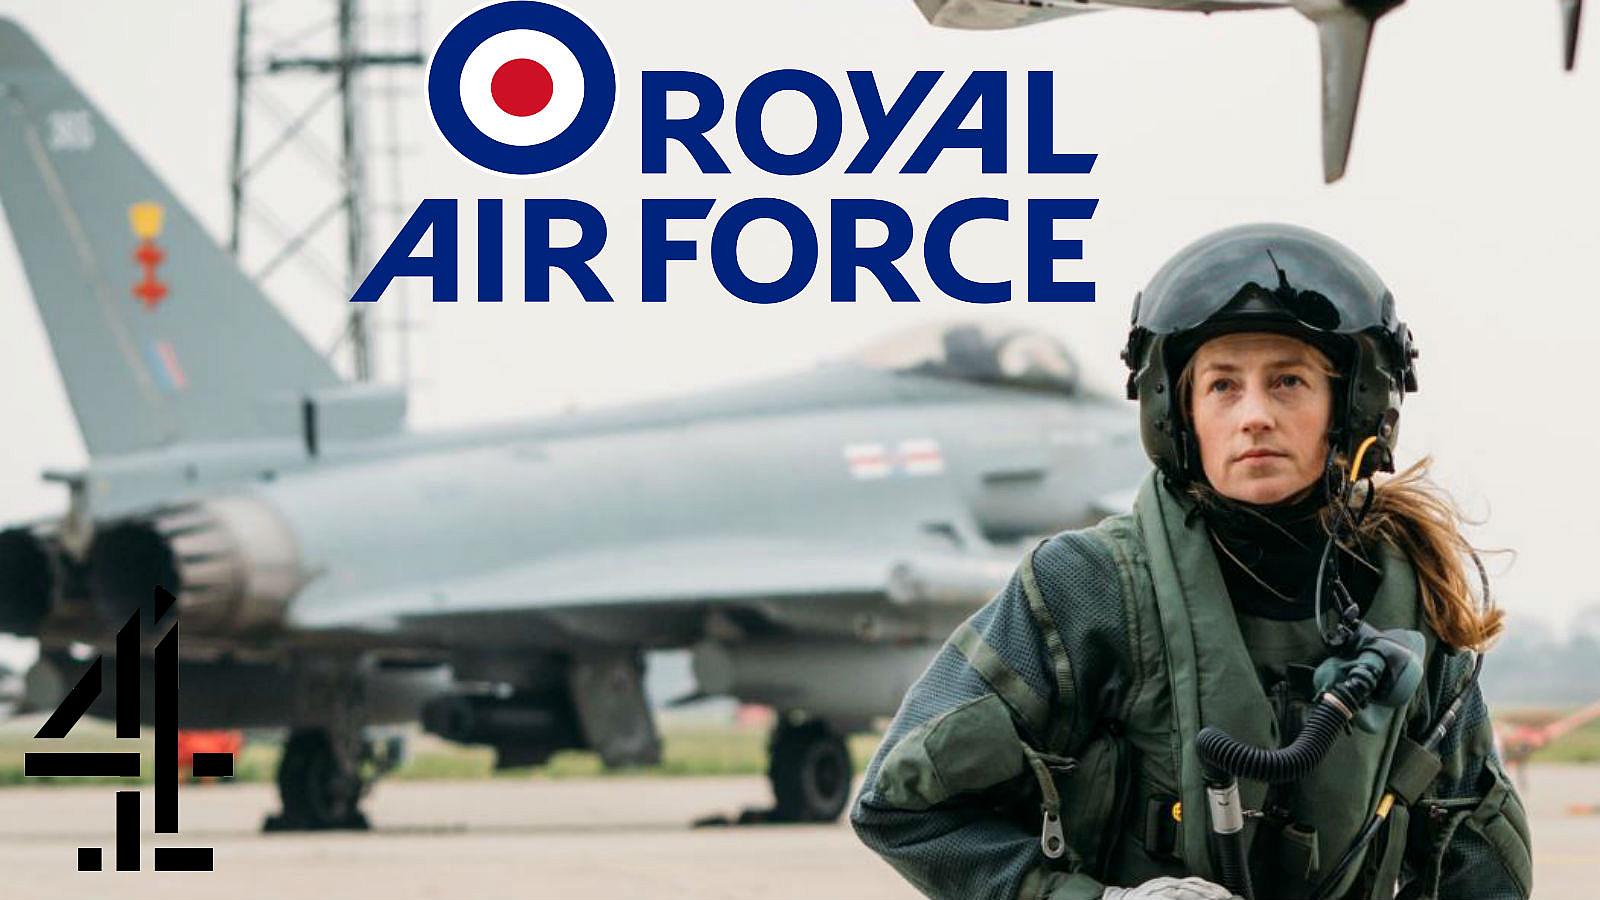 RAF advert challenging sexism to debut on Channel 4 tonight